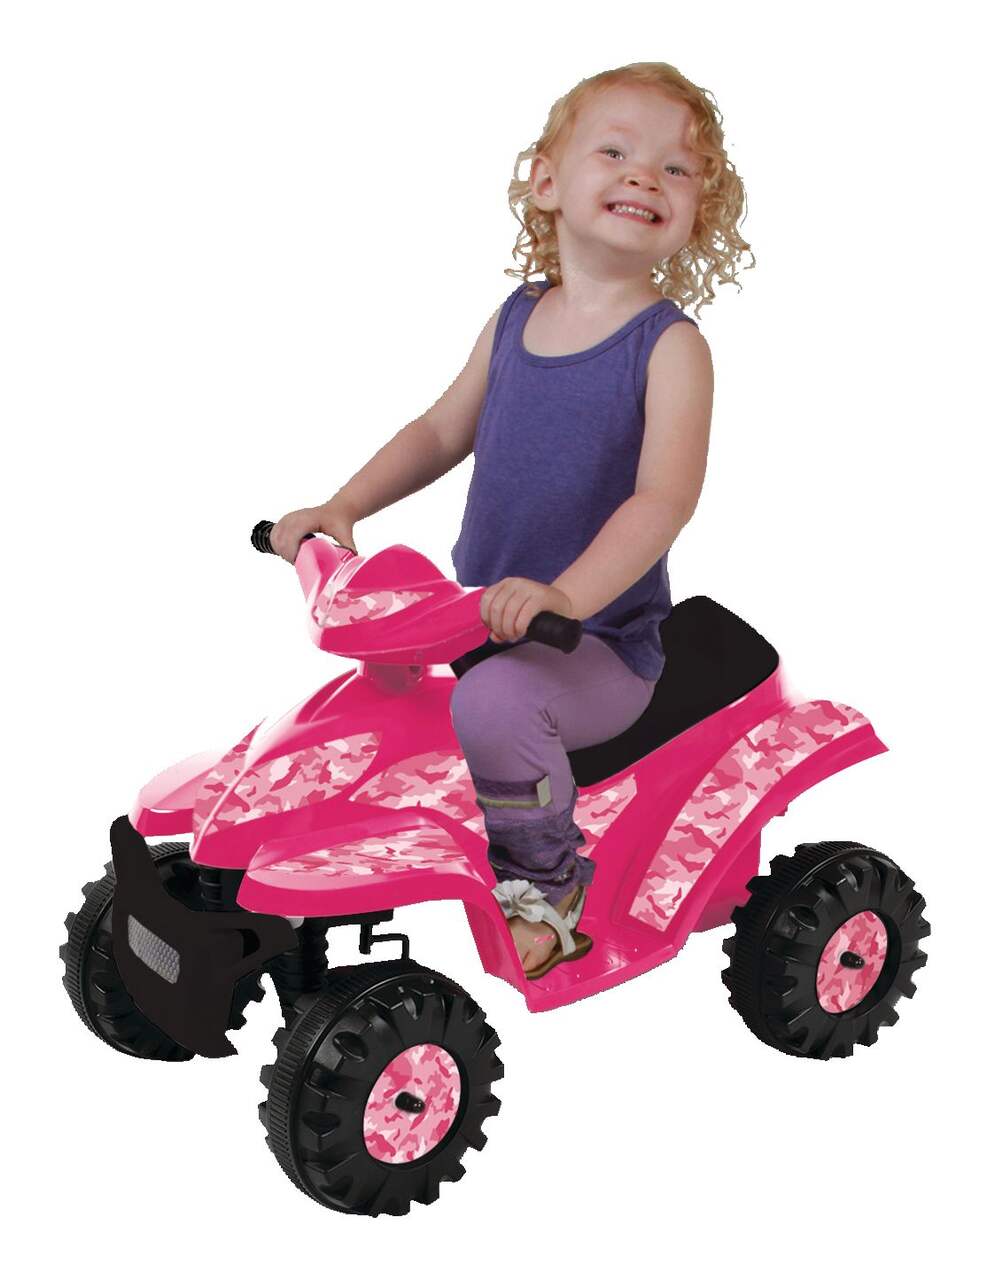 Rollplay 6V Electric Mini Ride-On Quad / ATV, 3.2km/h, Kids, Pink Camo, Ages  18 to 36 months